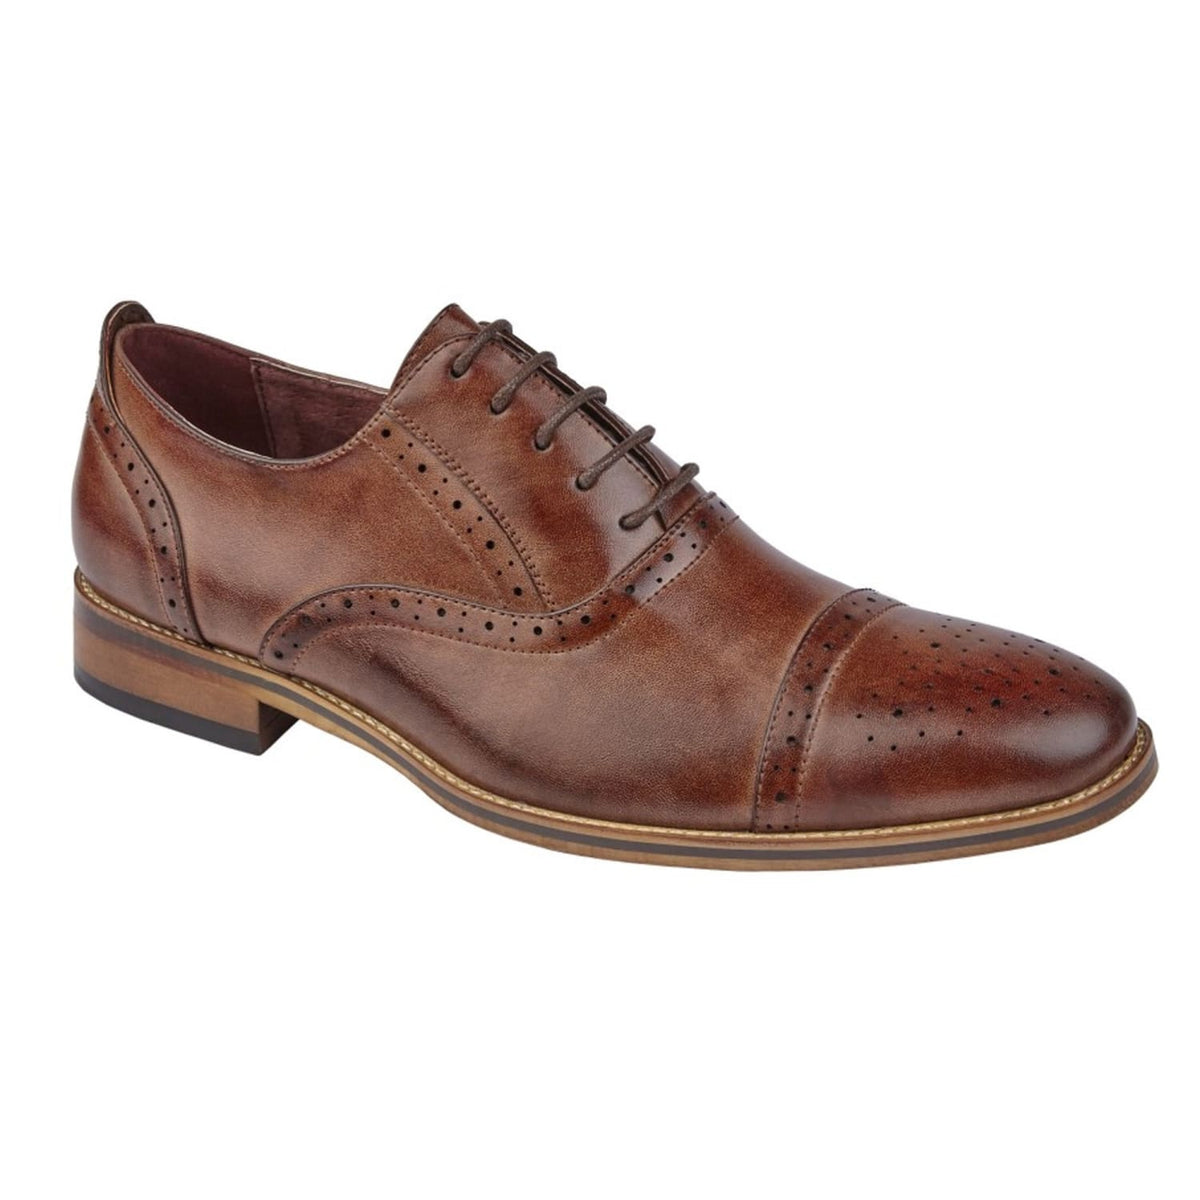 Big Men's Goor Lace Up Shoes - M516 - Brown | UK9 to UK14 - fatboys95